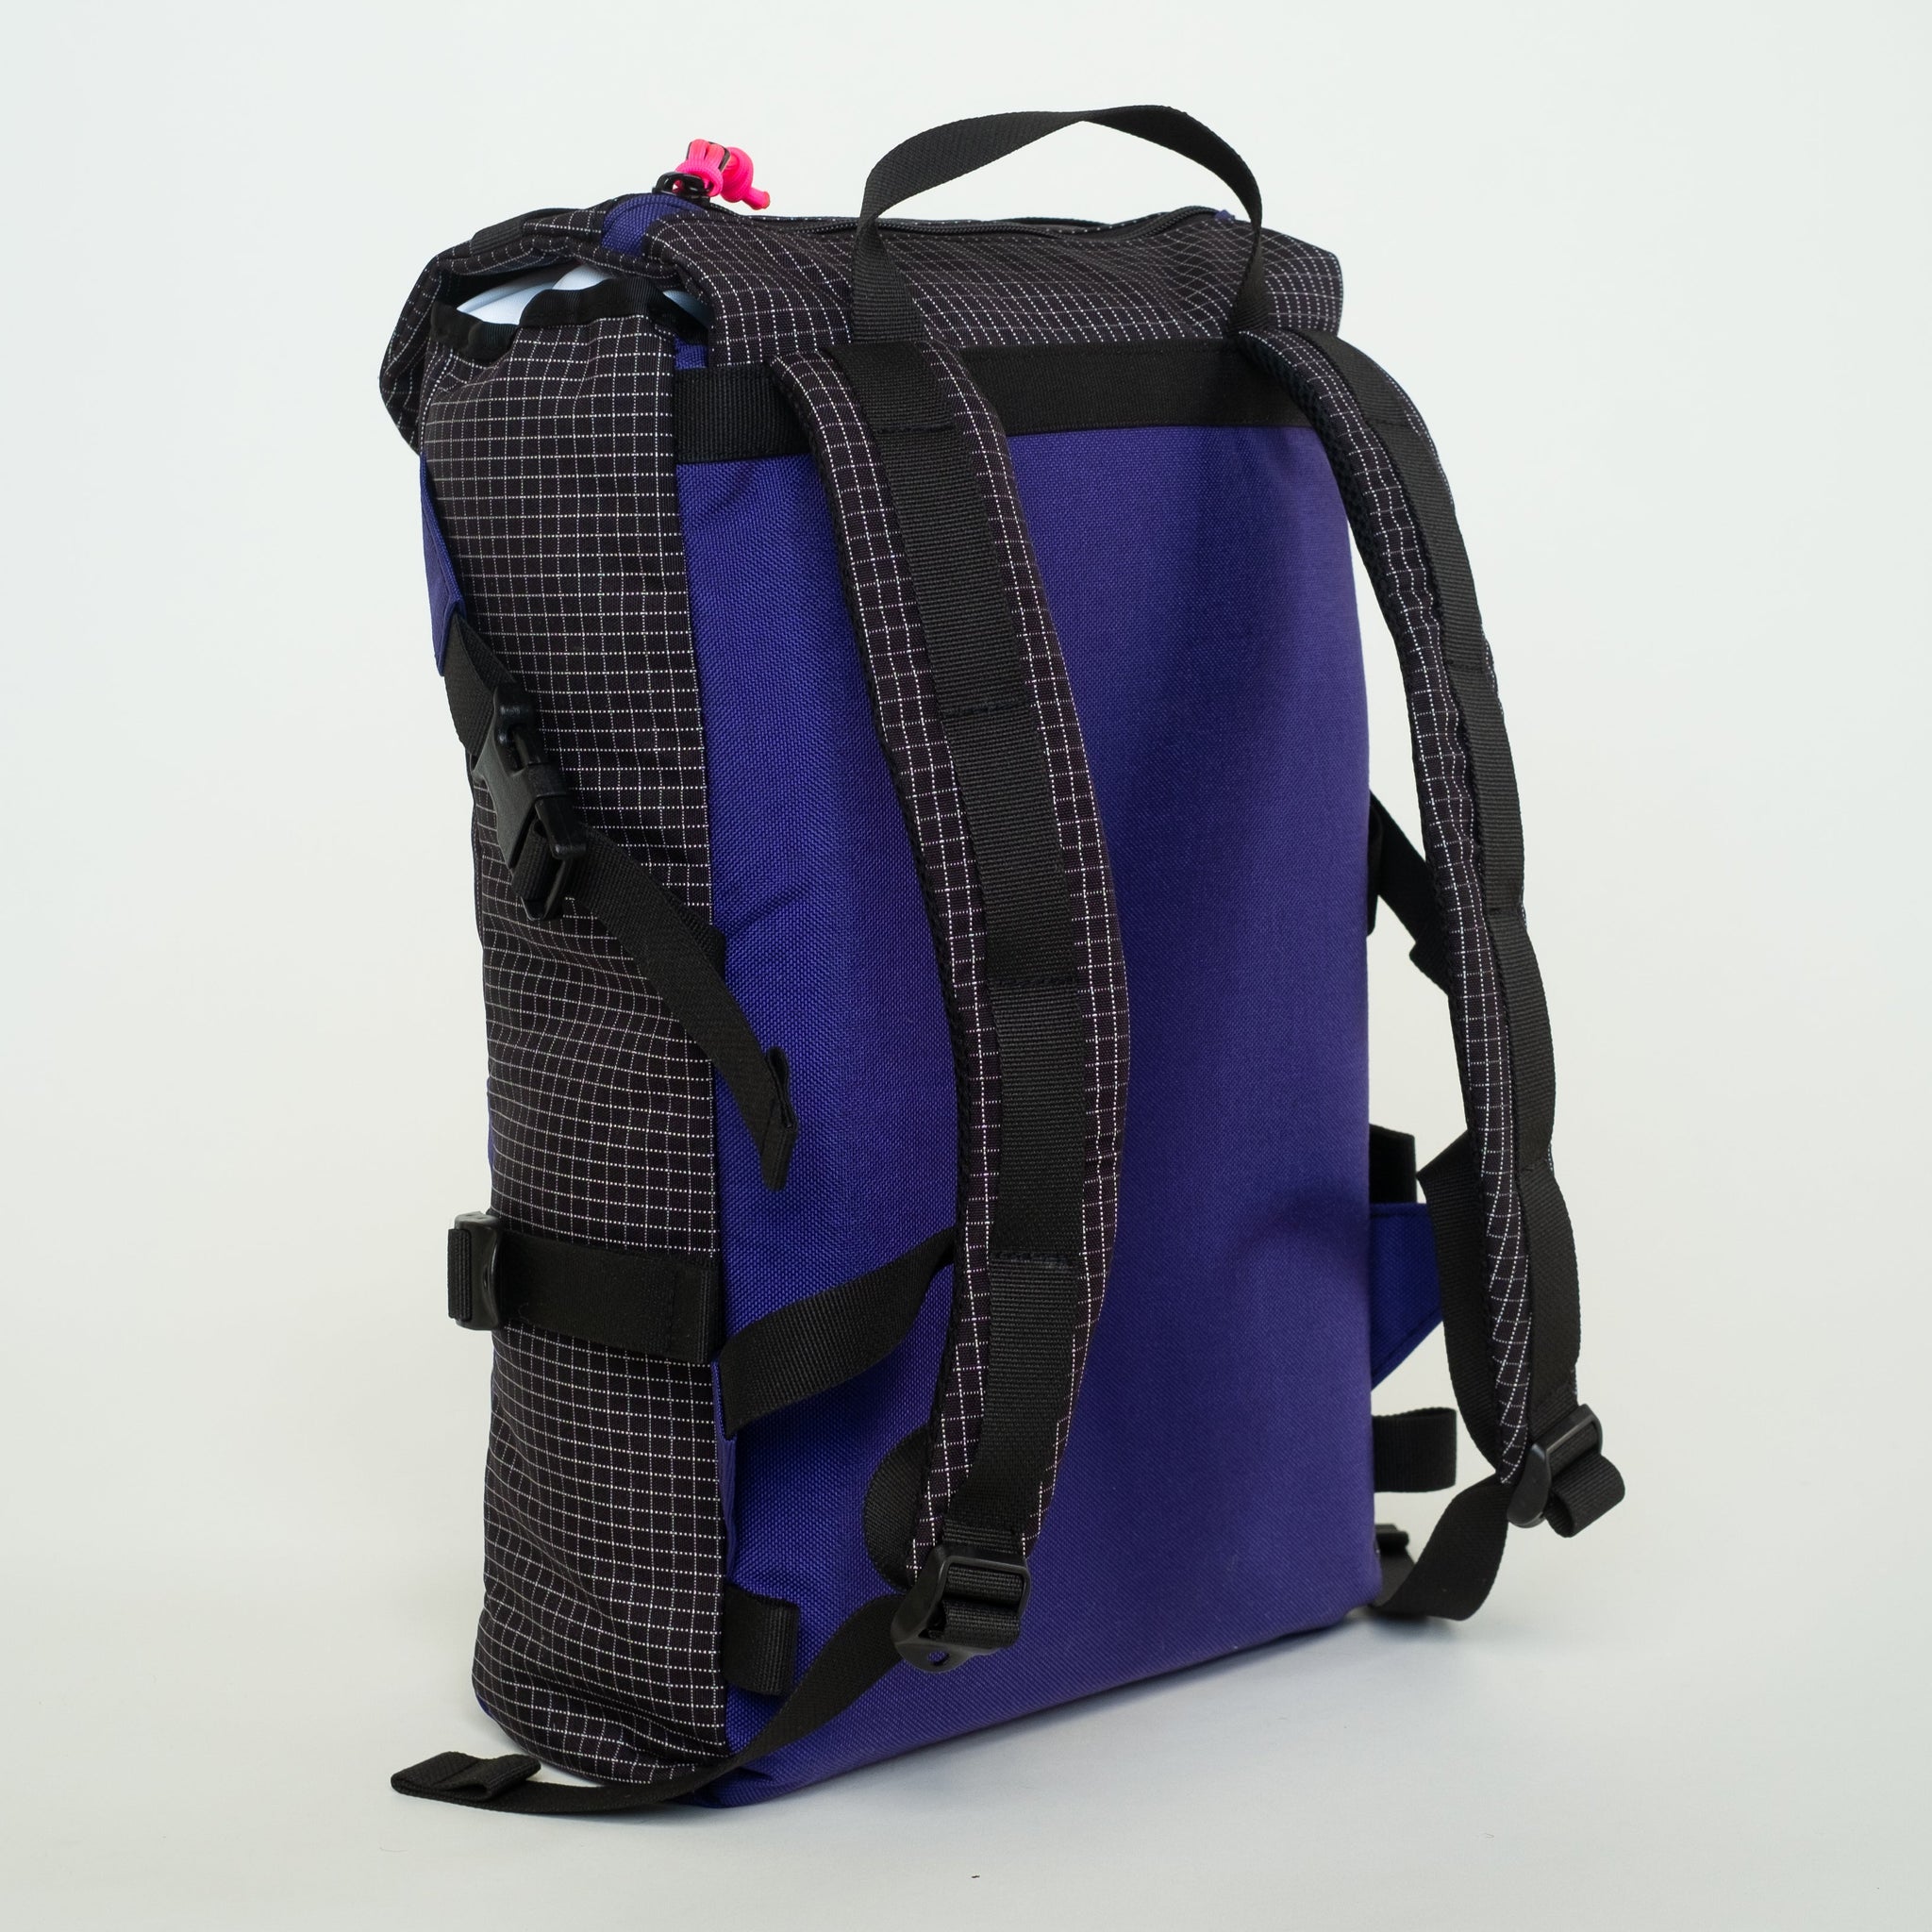 Traverse Pack - granolaproducts.com